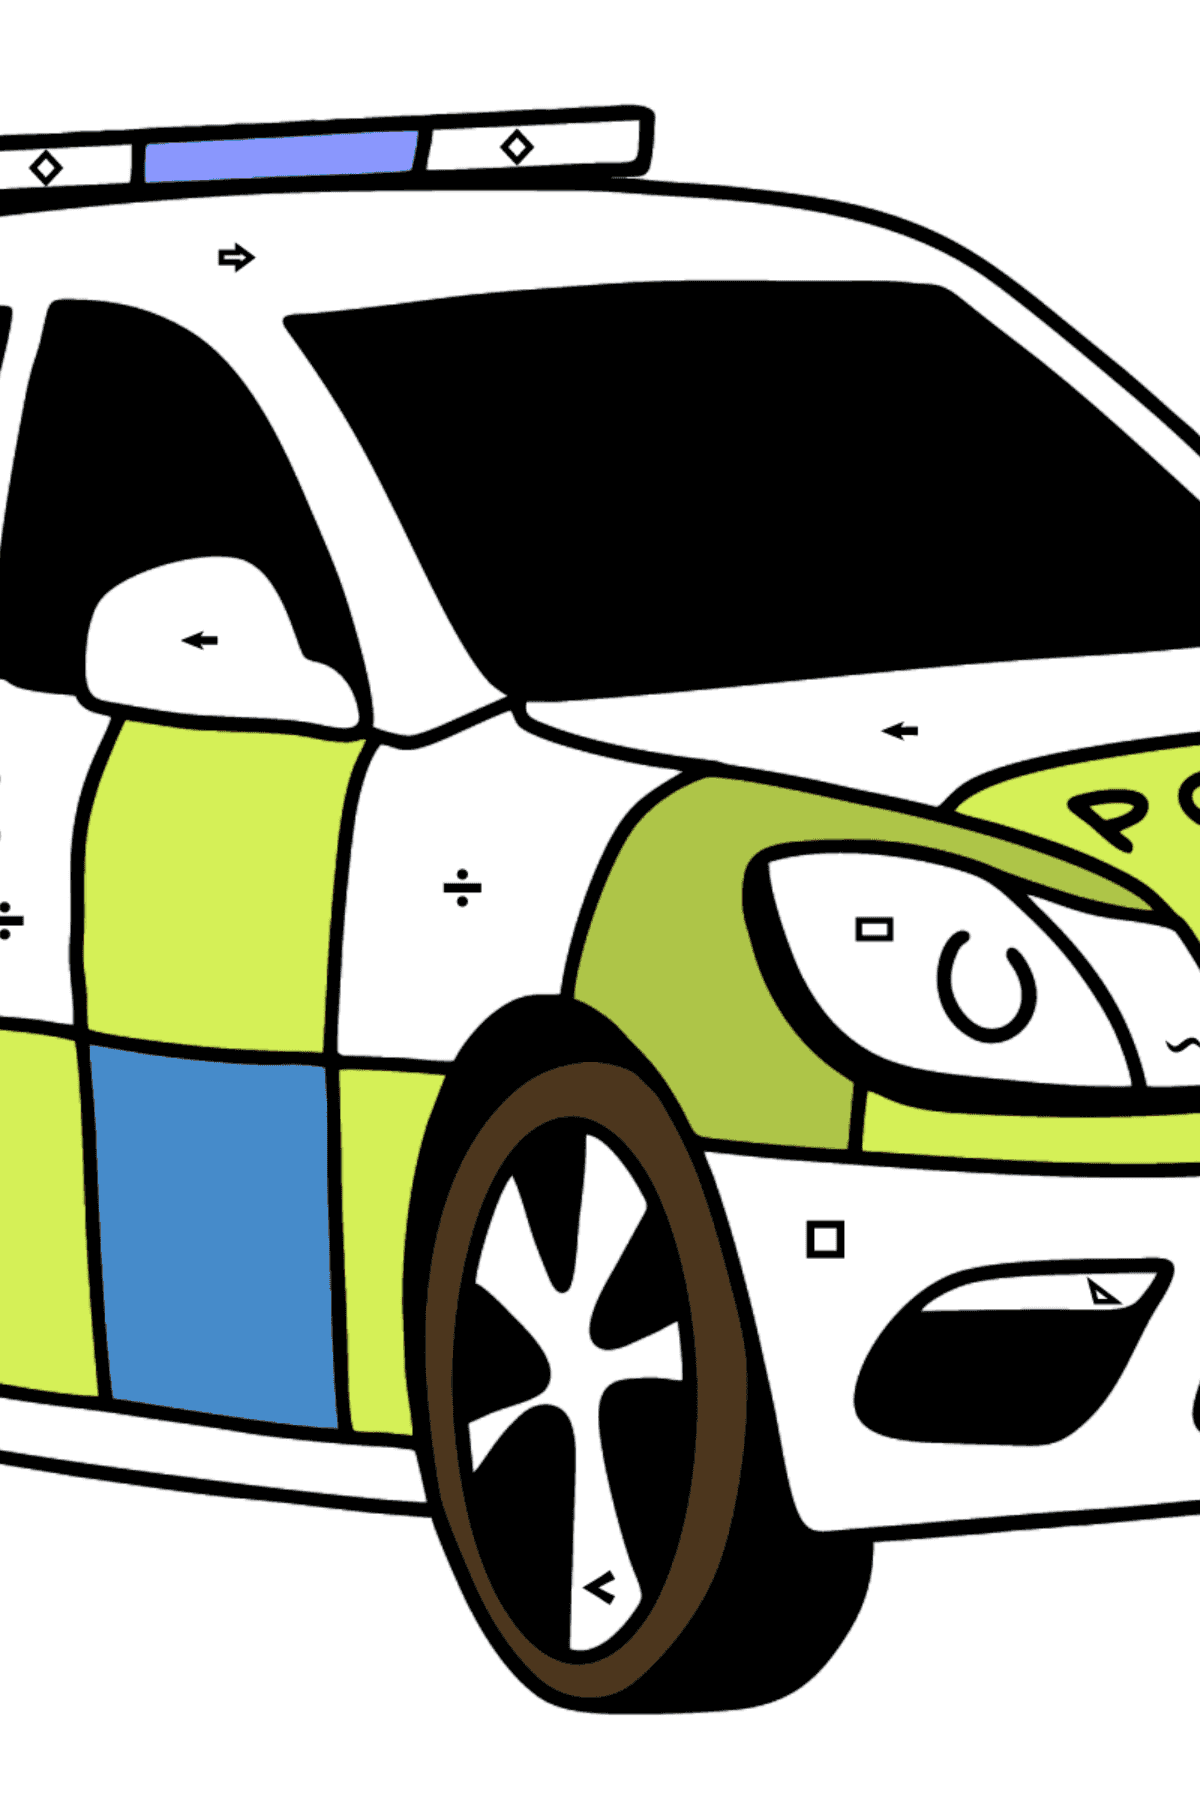 UK Police Car coloring page - Coloring by Symbols and Geometric Shapes for Kids